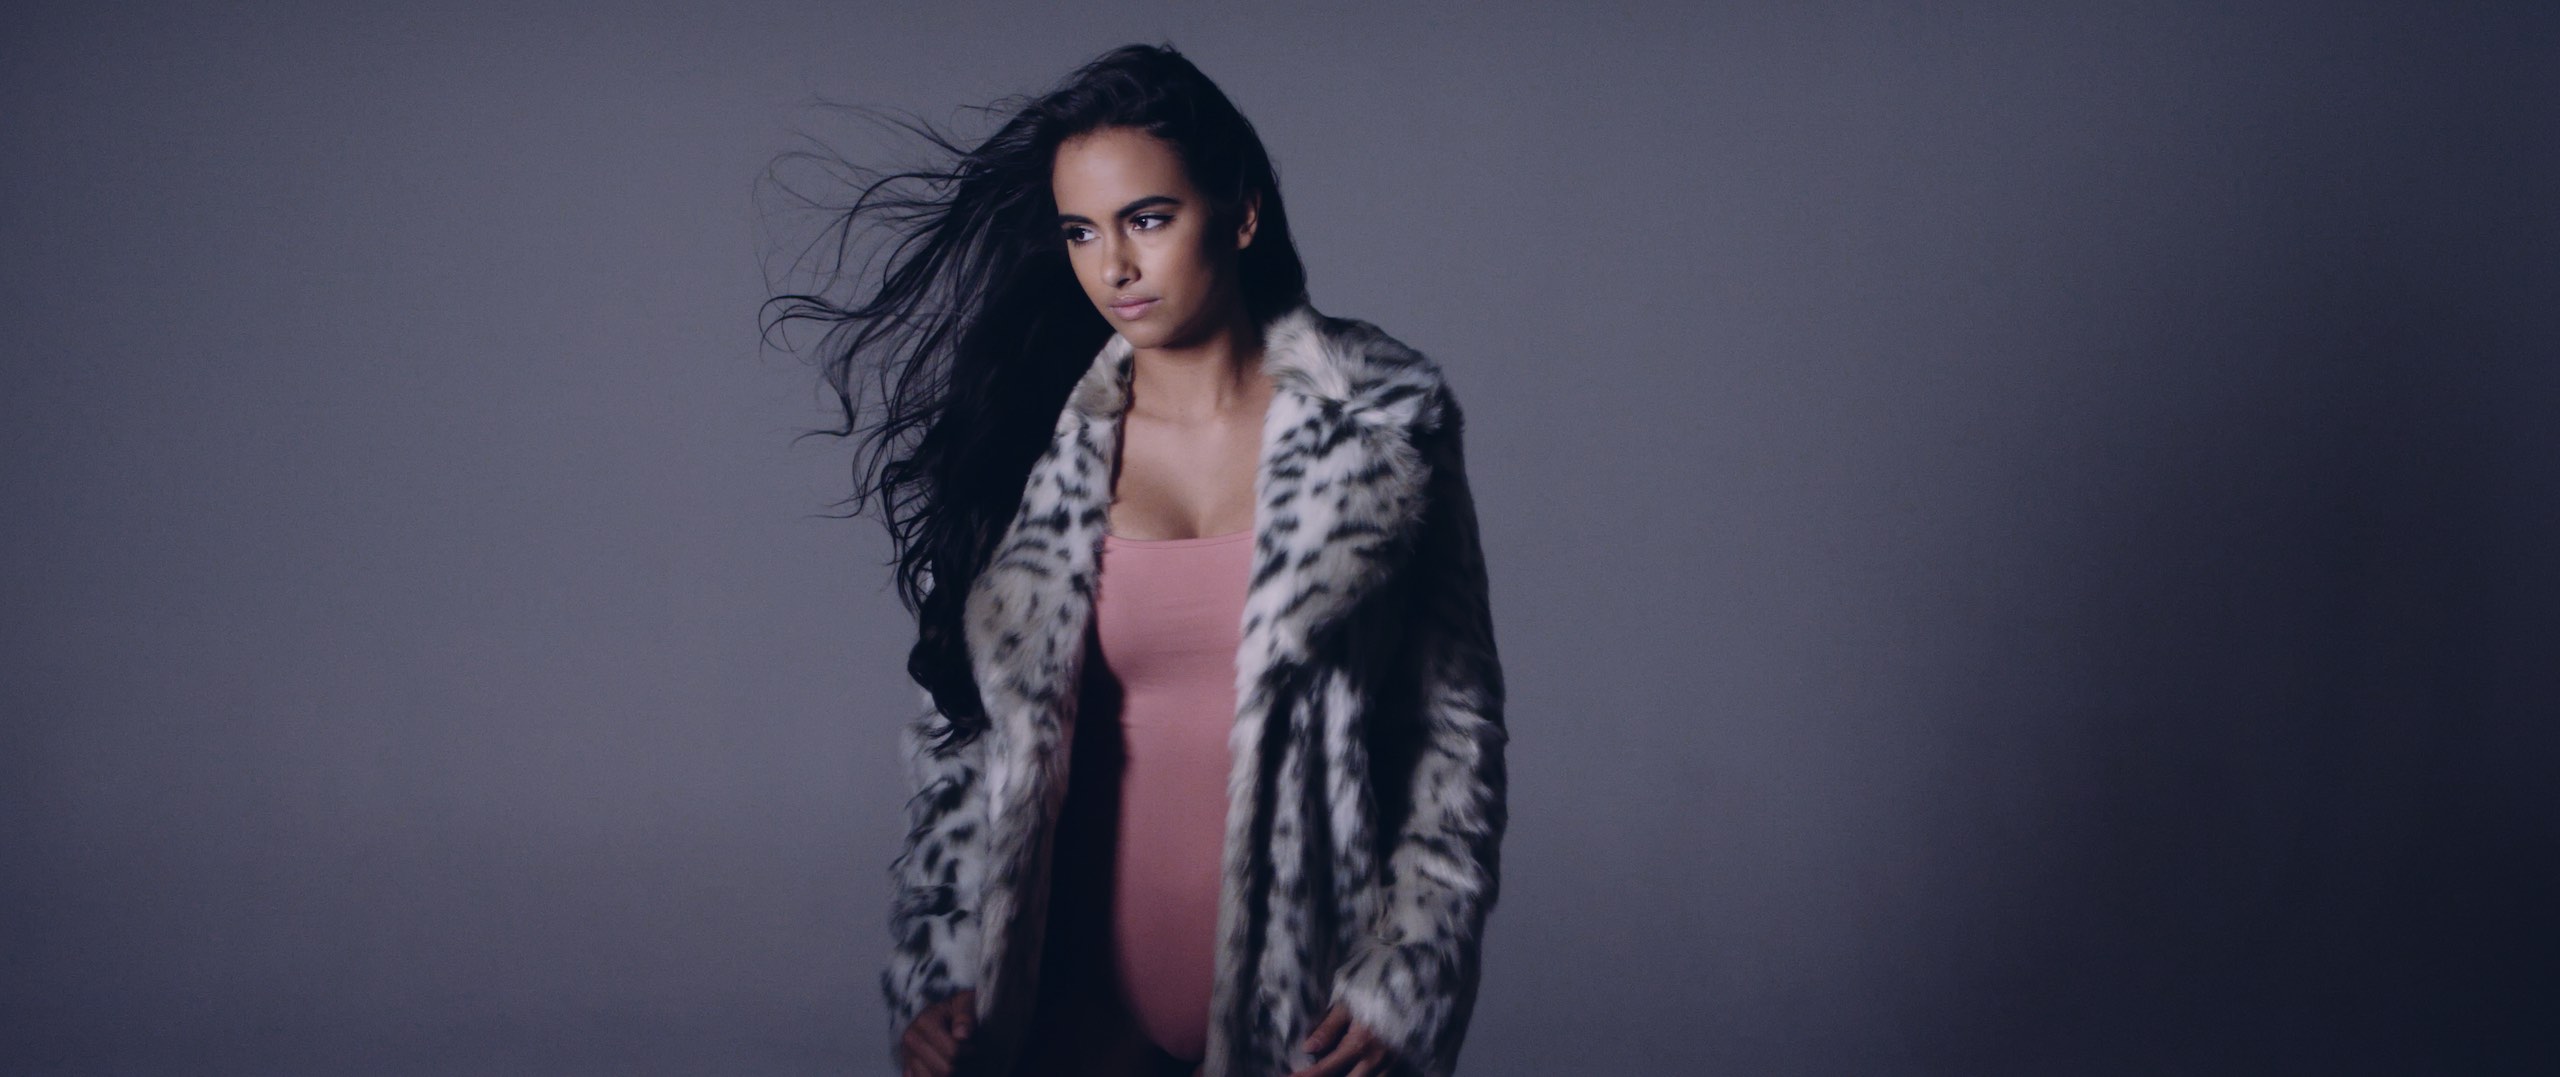 The Dailies Episode 202 BTS Footage showing model with long black hair wearing a black and white fur coat